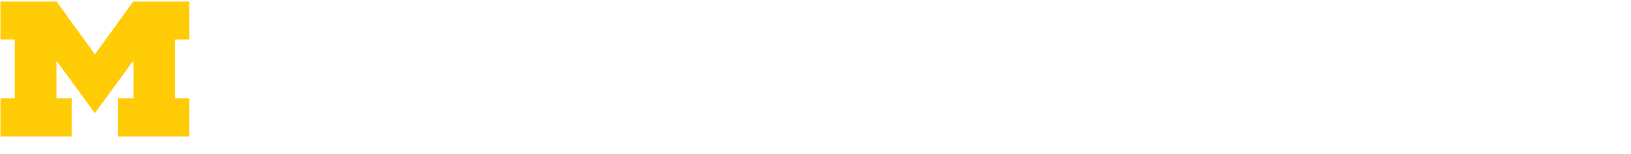 Diversity, Equality & Inclusion logo